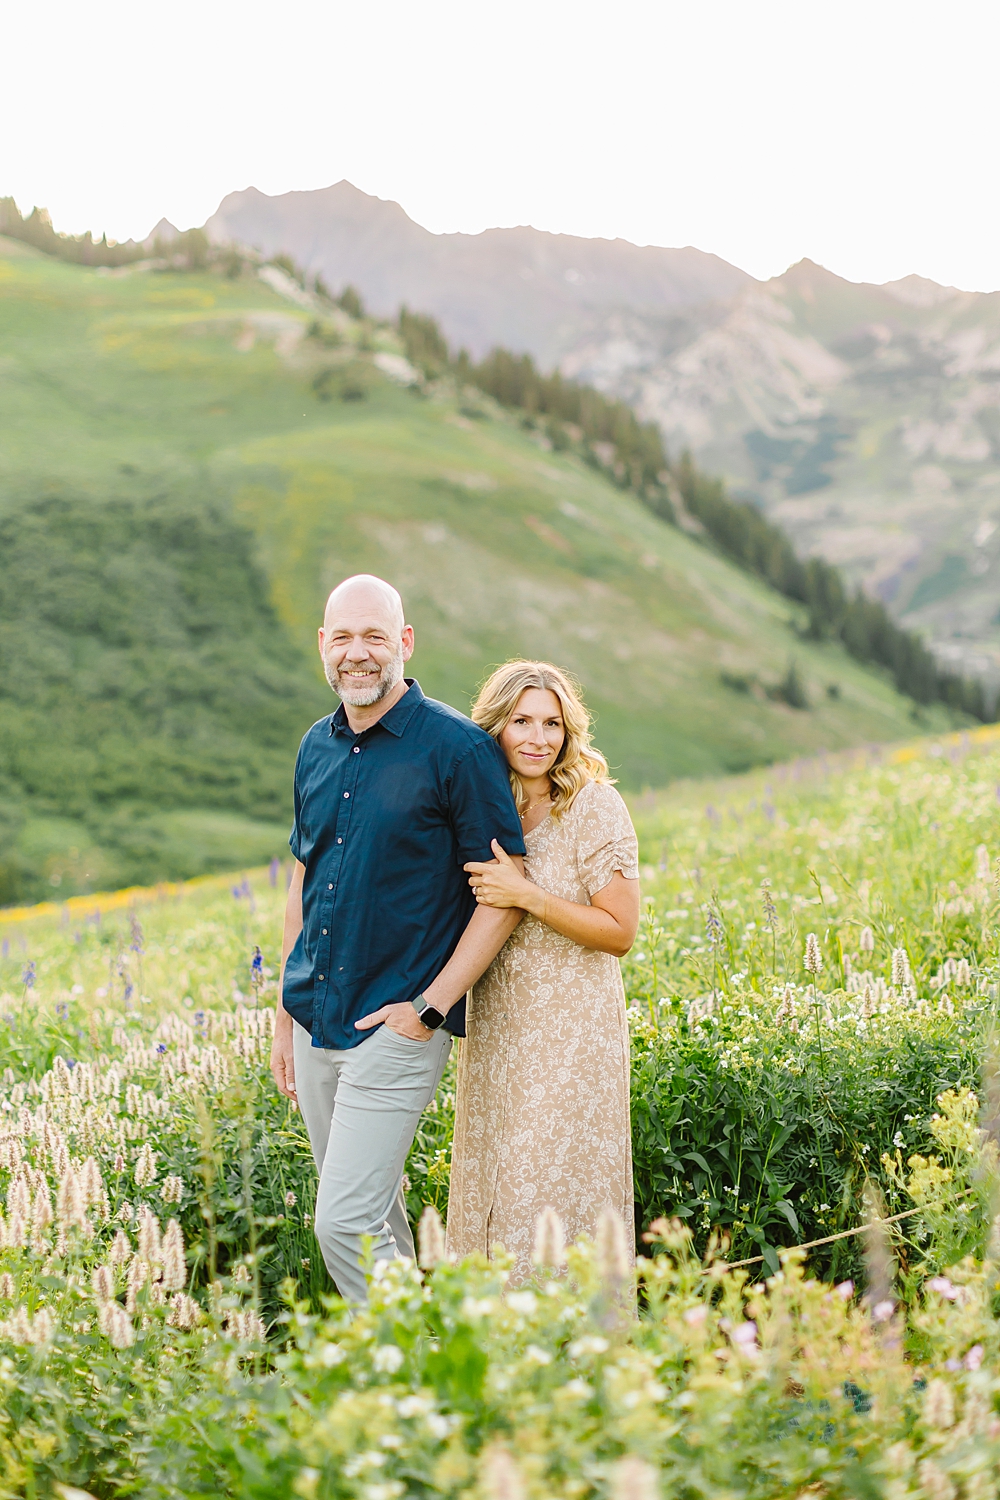 Albion Basin Family Pictures | Full Bloom